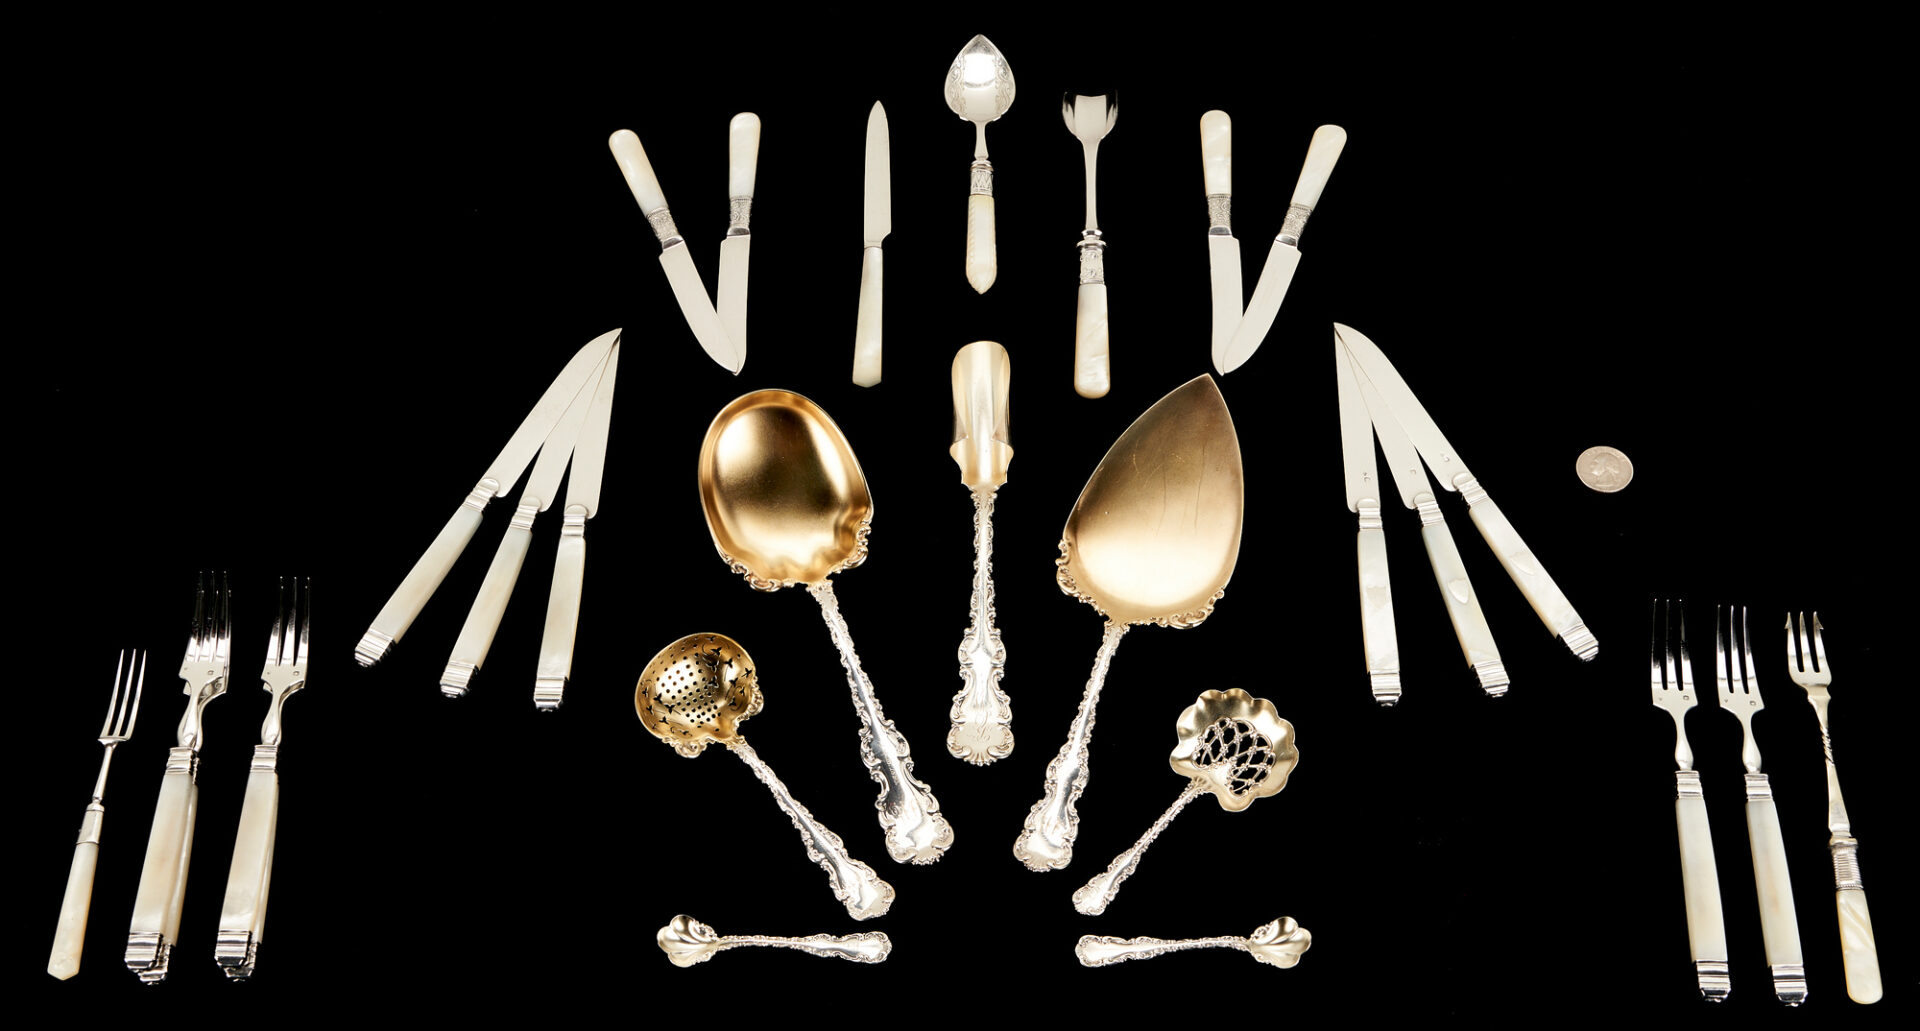 Lot 367: 28 pcs Flatware: Whiting Sterling Silver Dessert Service plus Mother of Pearl Handled Flatware